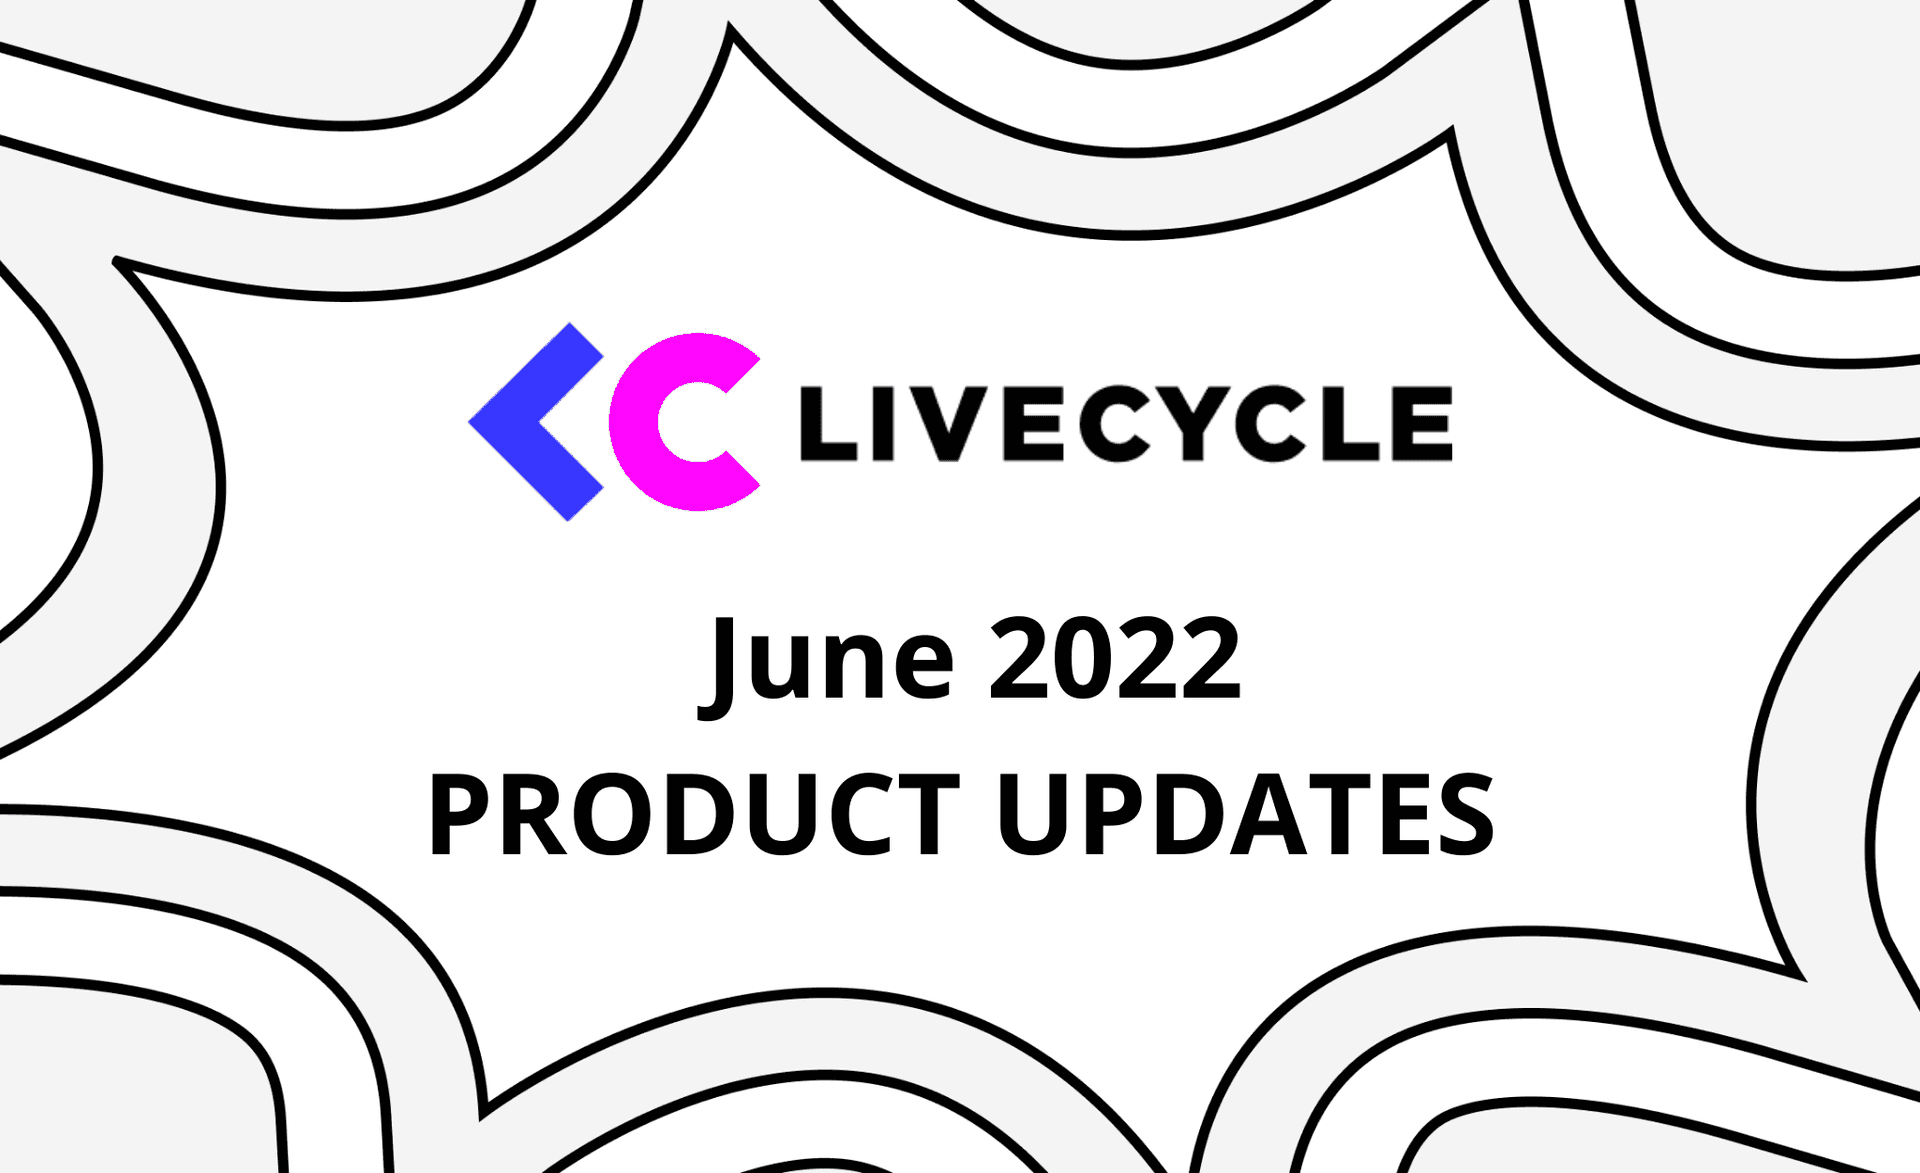 Livecycle Product Updates - June 2022